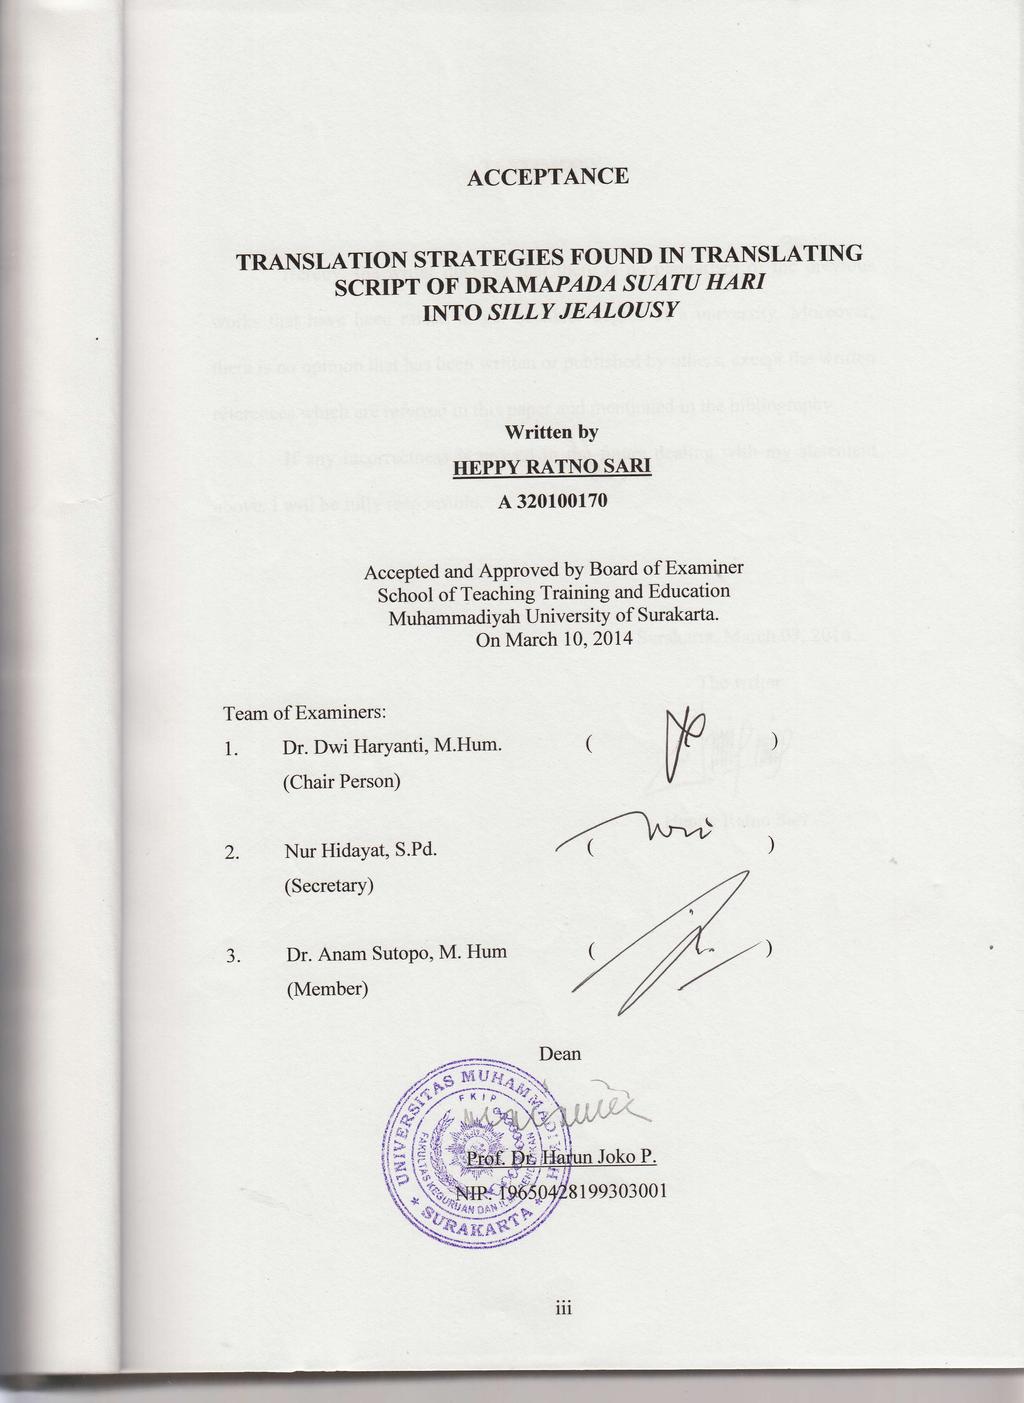 ACCEPTAl\CE TRANSLATION STRATEGIES FOT'I\D IN TRANSLATING SCRIPT OF DRAM APADA SUATU HARI INTO SILLY JEALOUSY Written by HEPPY RATNO SARI A 320100170 Accepted and Approved by Board of Examiner School